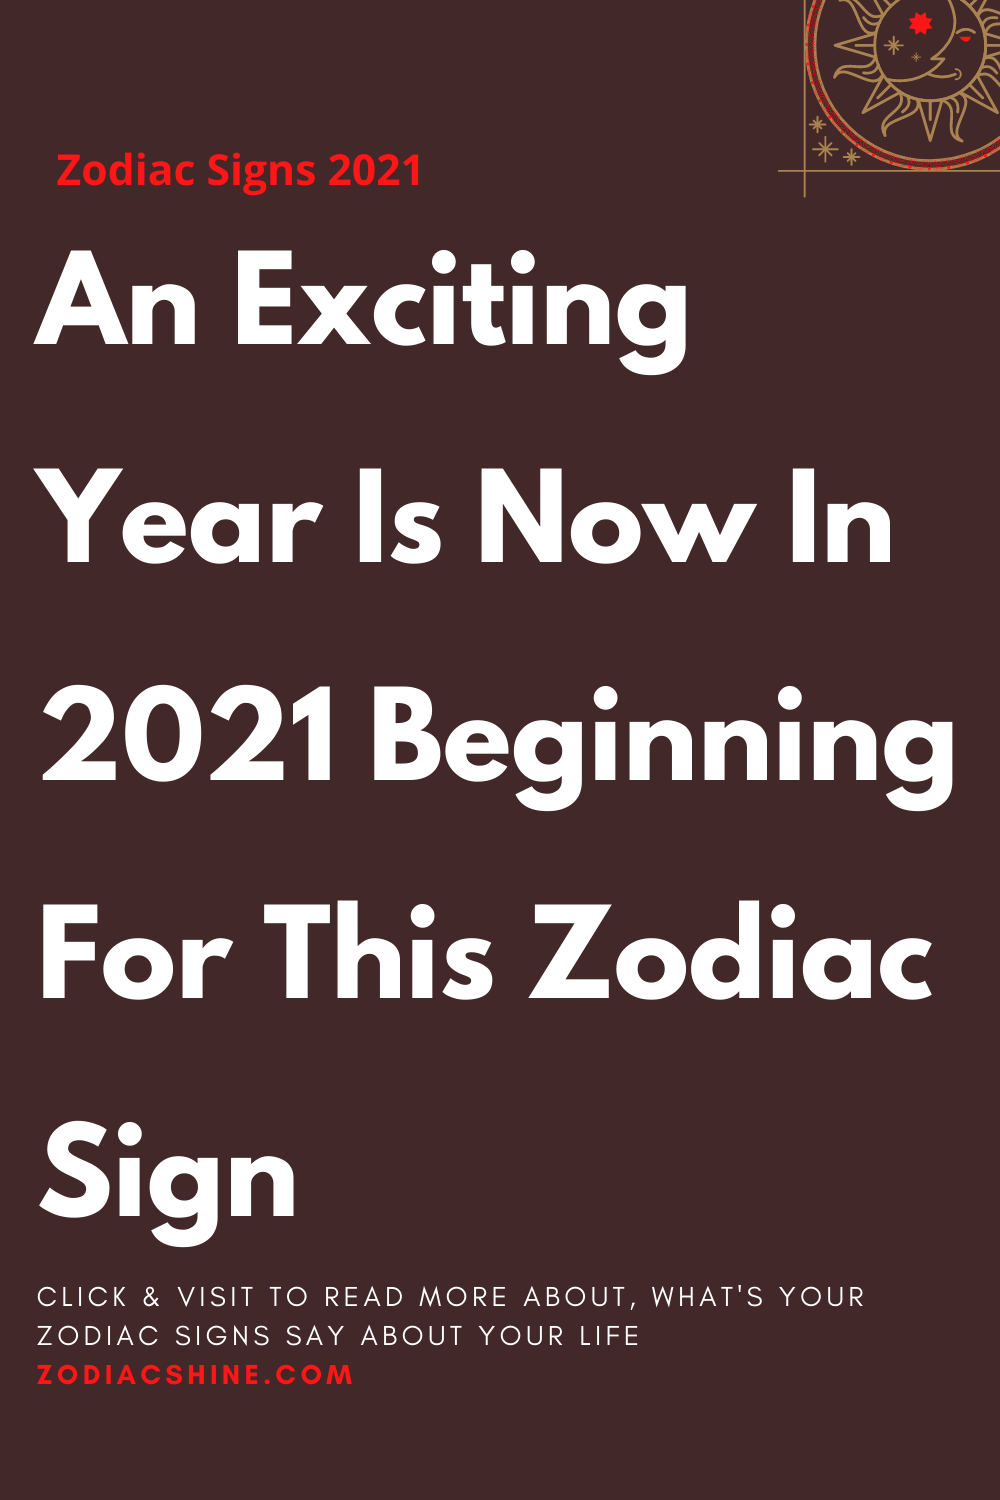 An Exciting Year Is Now In 2021 Beginning For This Zodiac Sign